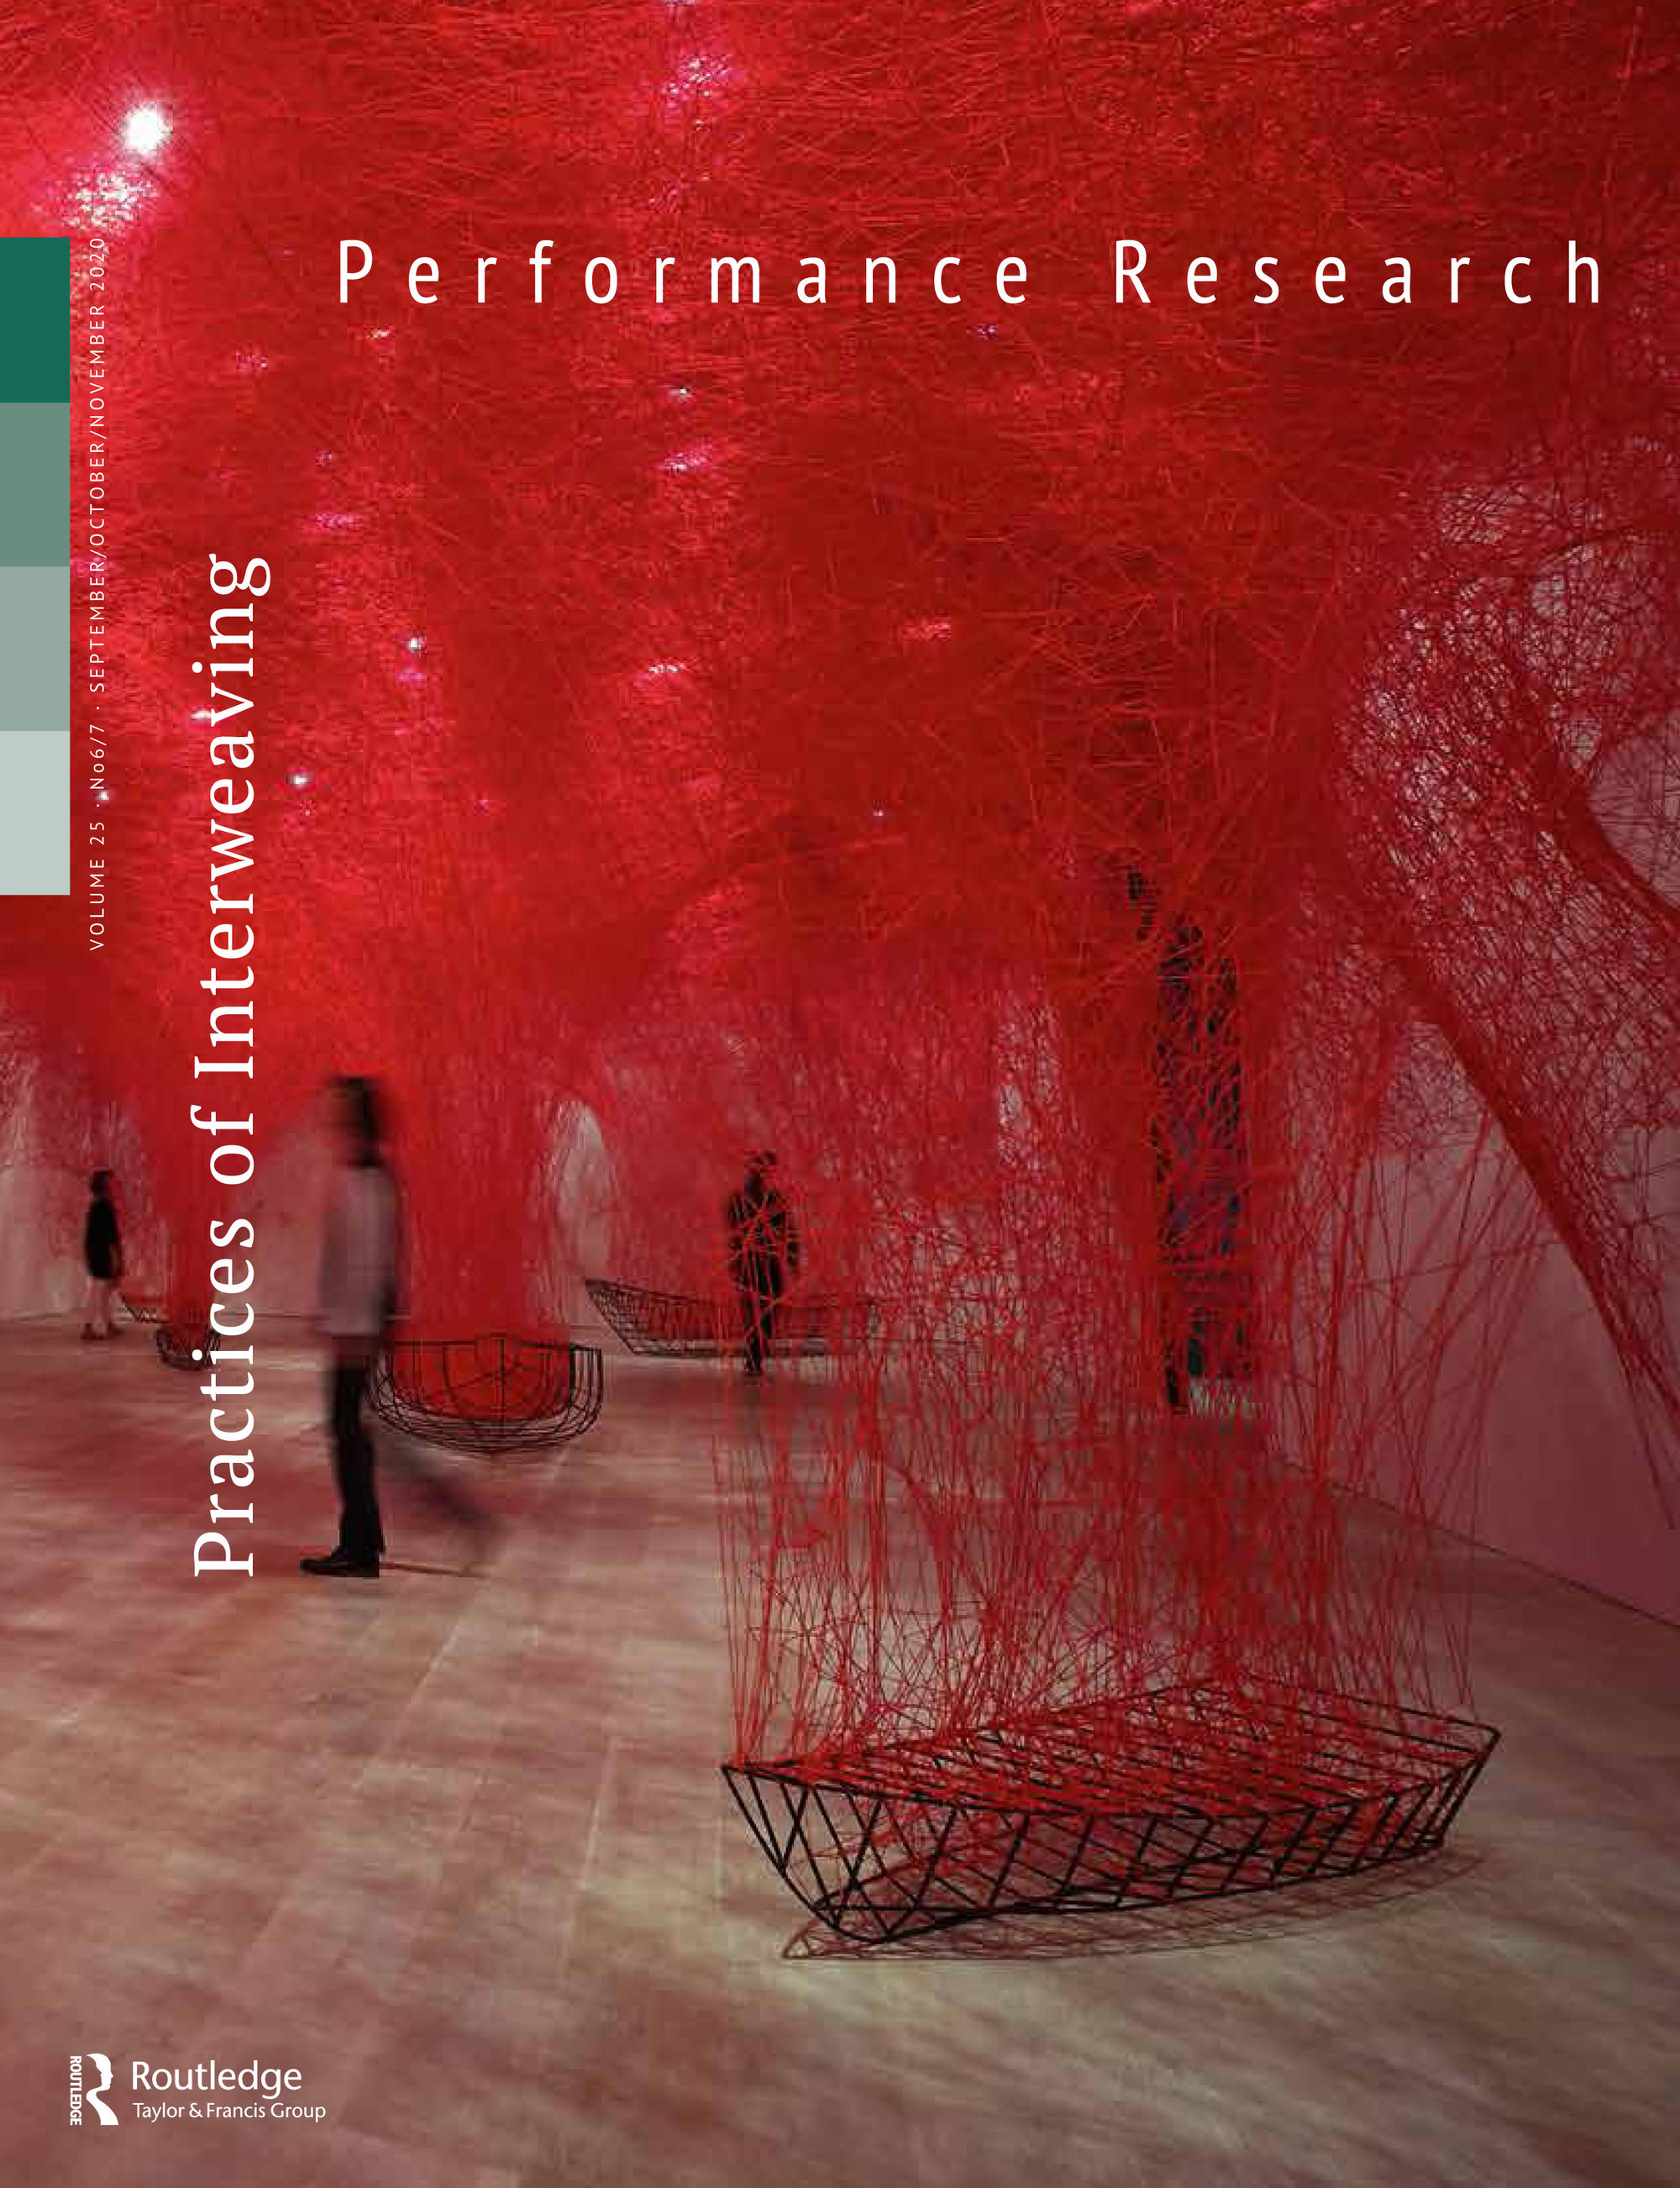 PerfomanceResearch_Cover_front